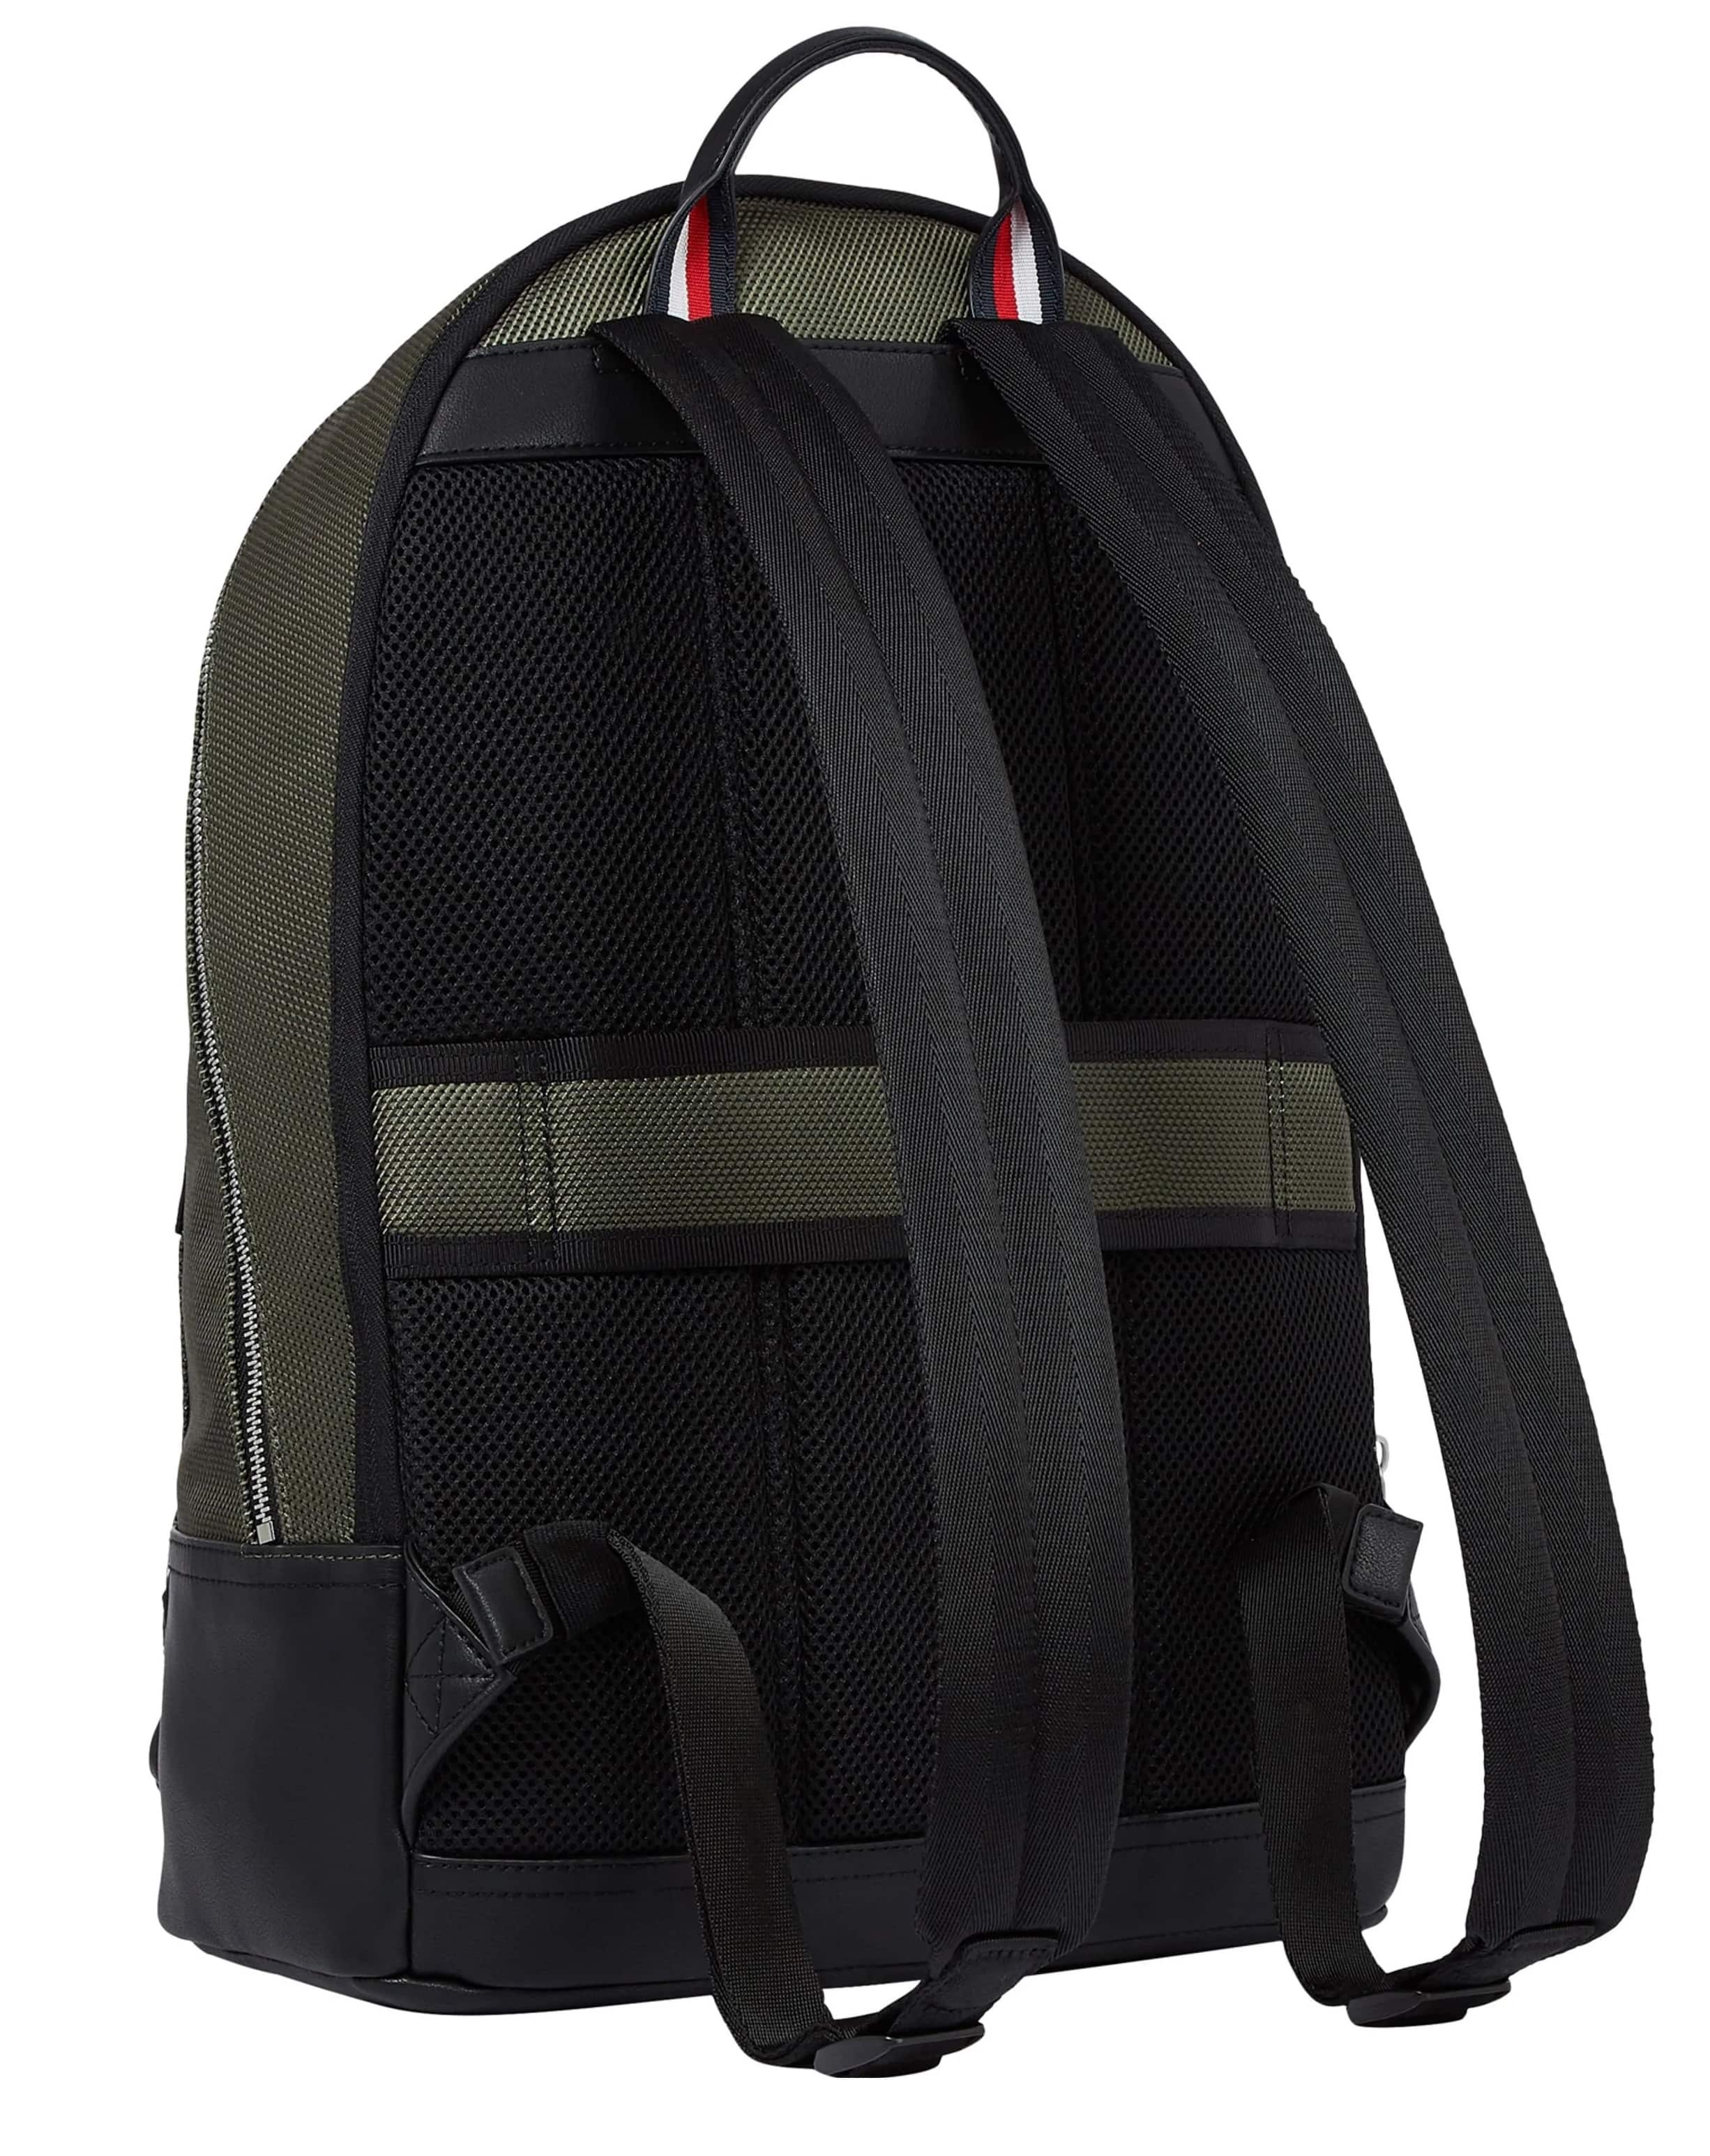 BALO TOMMY HILFIGER ESSENTIAL 1985 NYLON BACKPACK 4